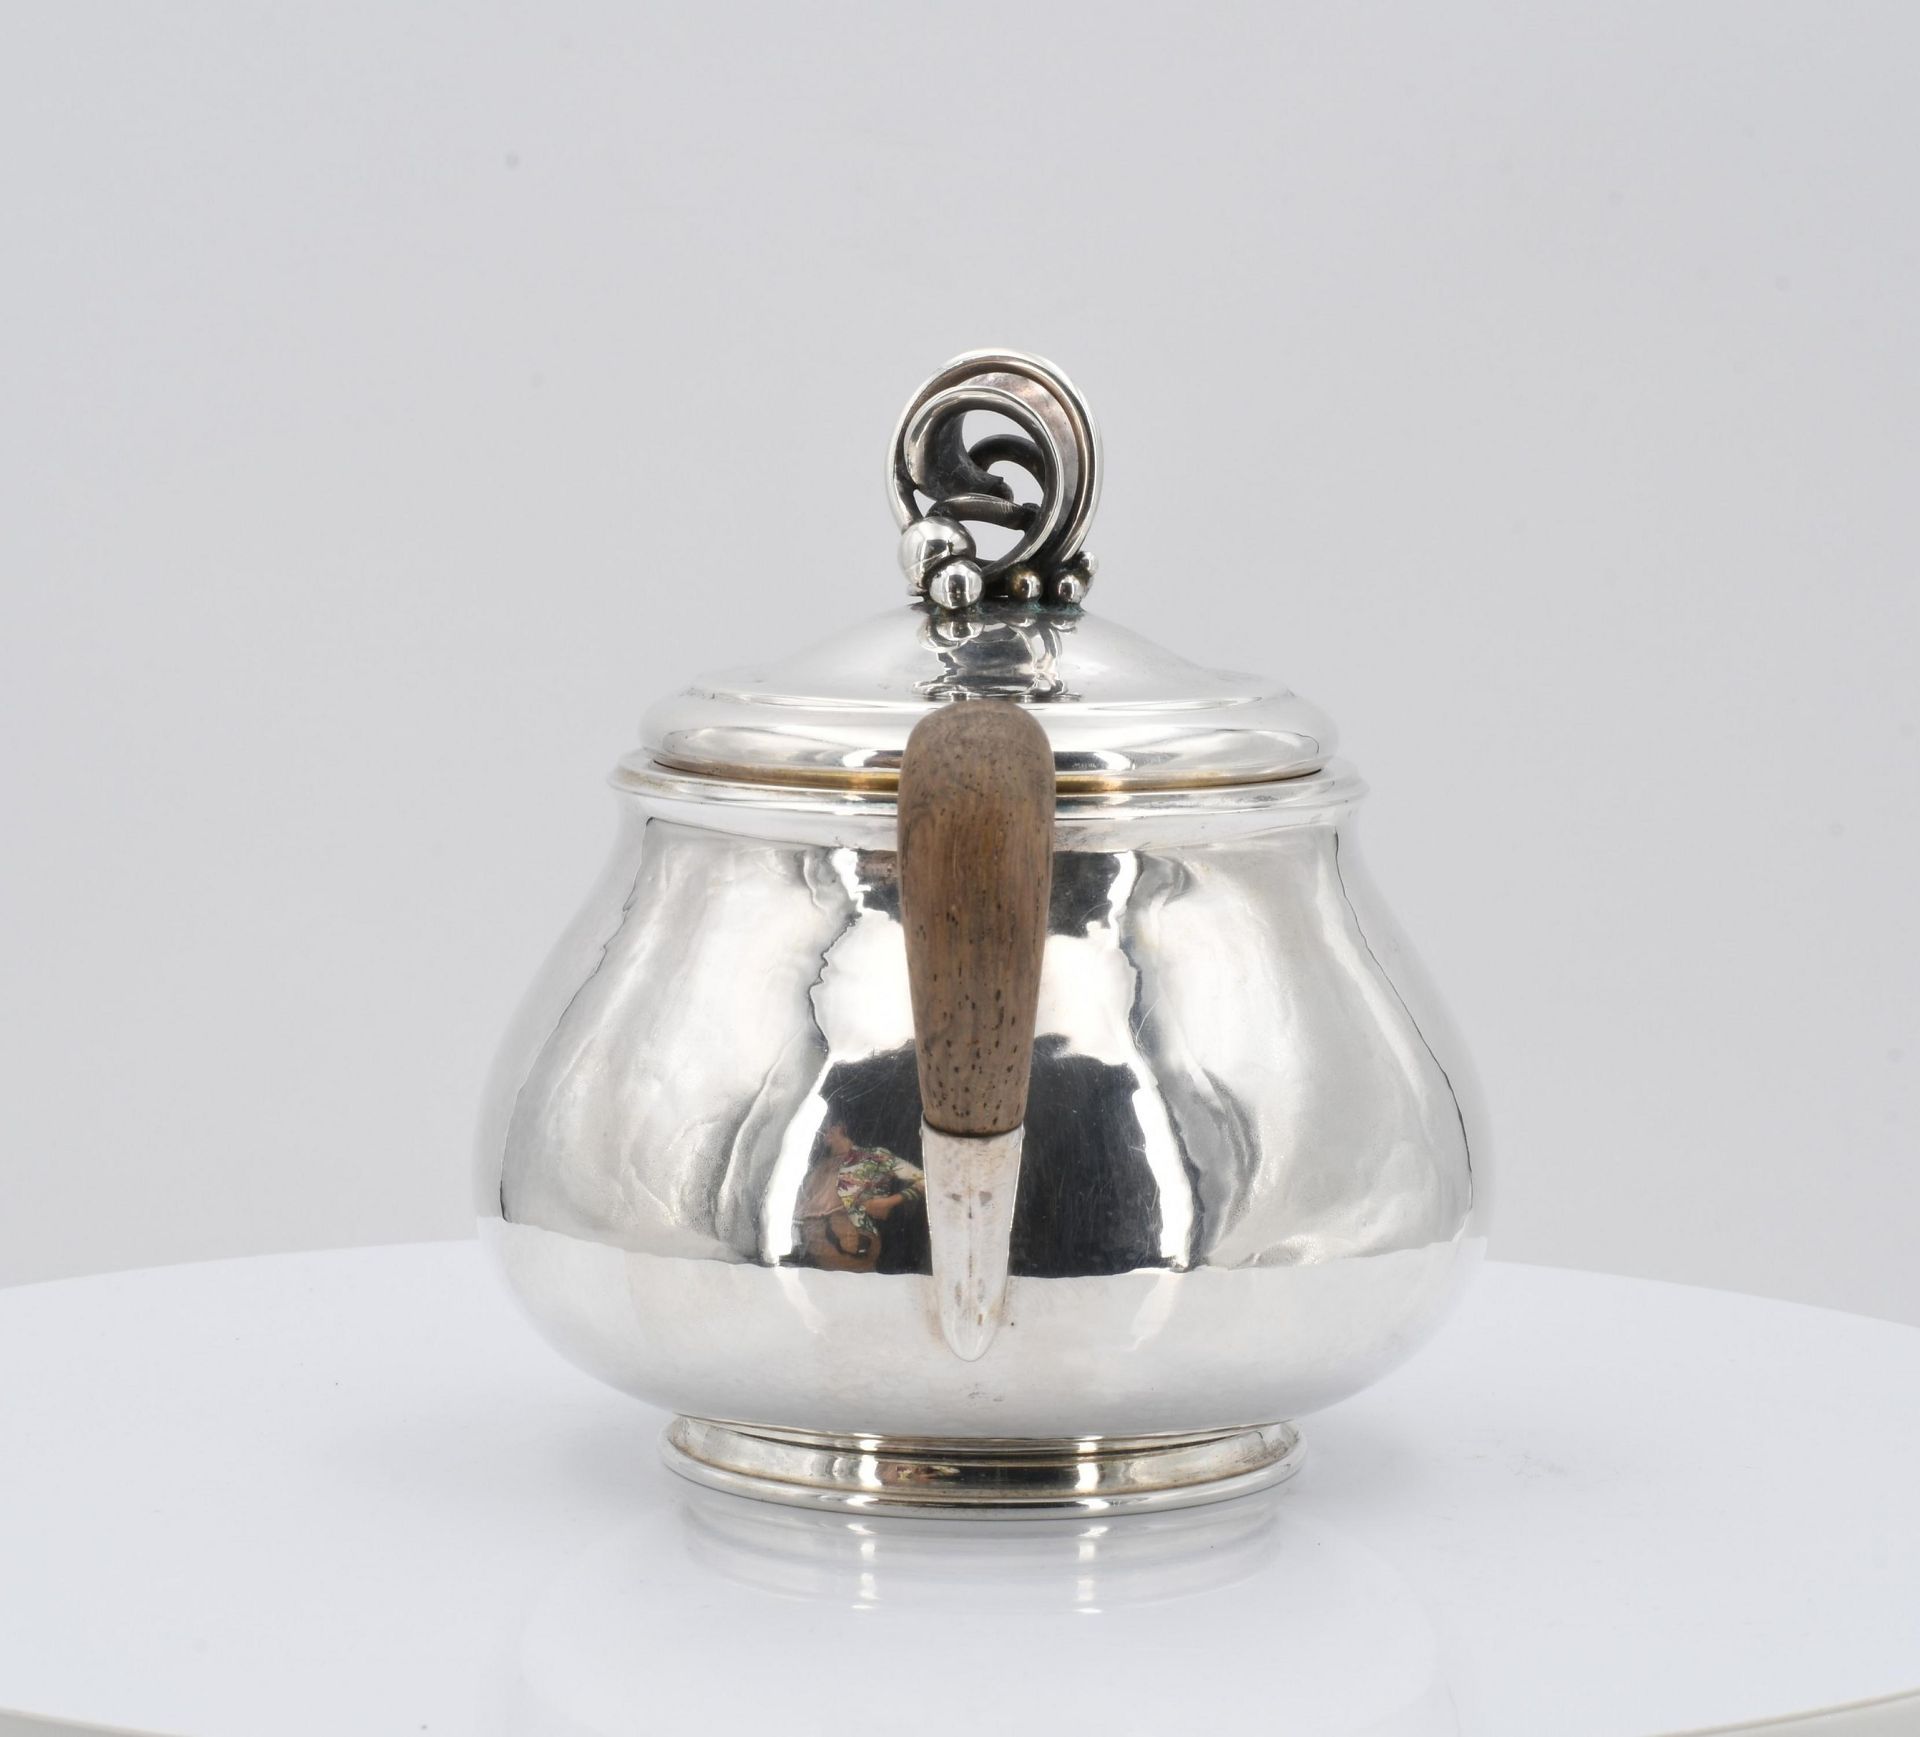 Coffee set with martellé surface and vegetal knobs - Image 13 of 21